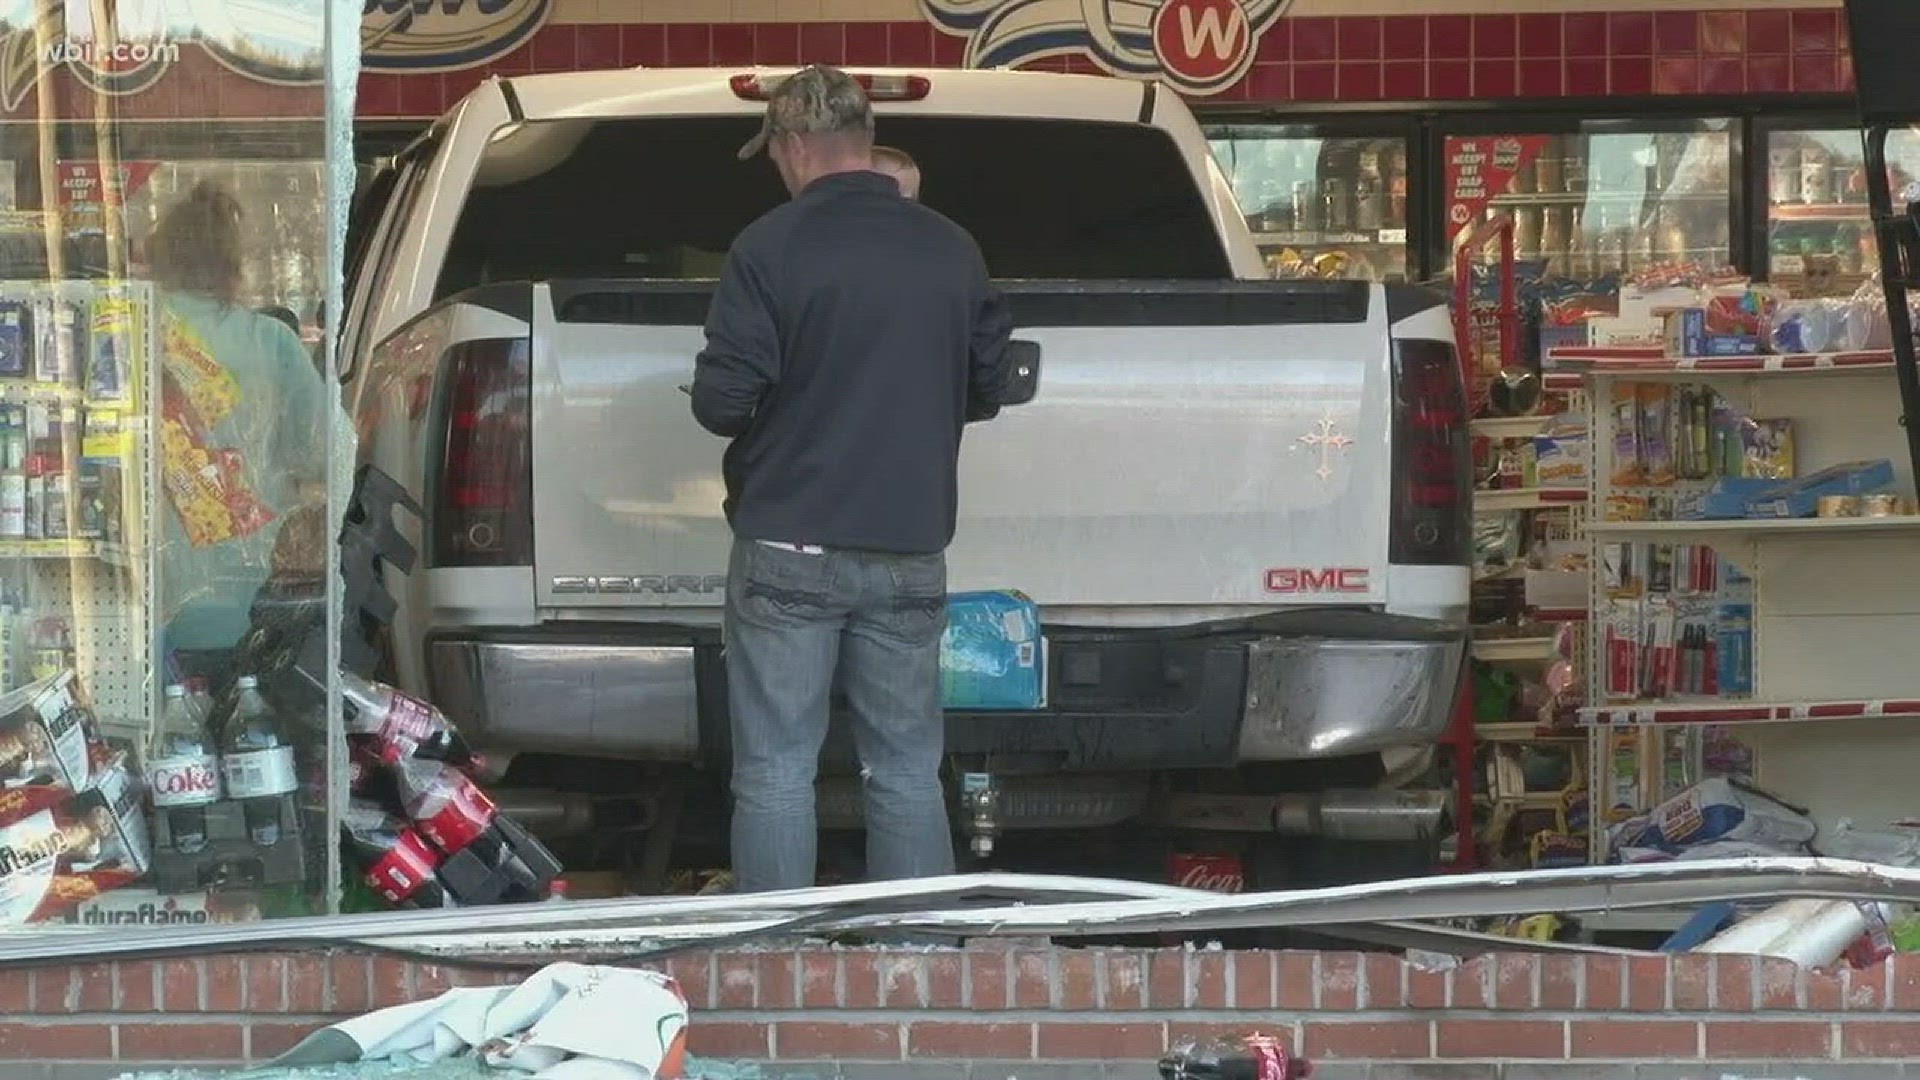 Jan. 31, 2018: Police are cleaning up after a truck crashed into a Weigel's in Strawberry Plains.